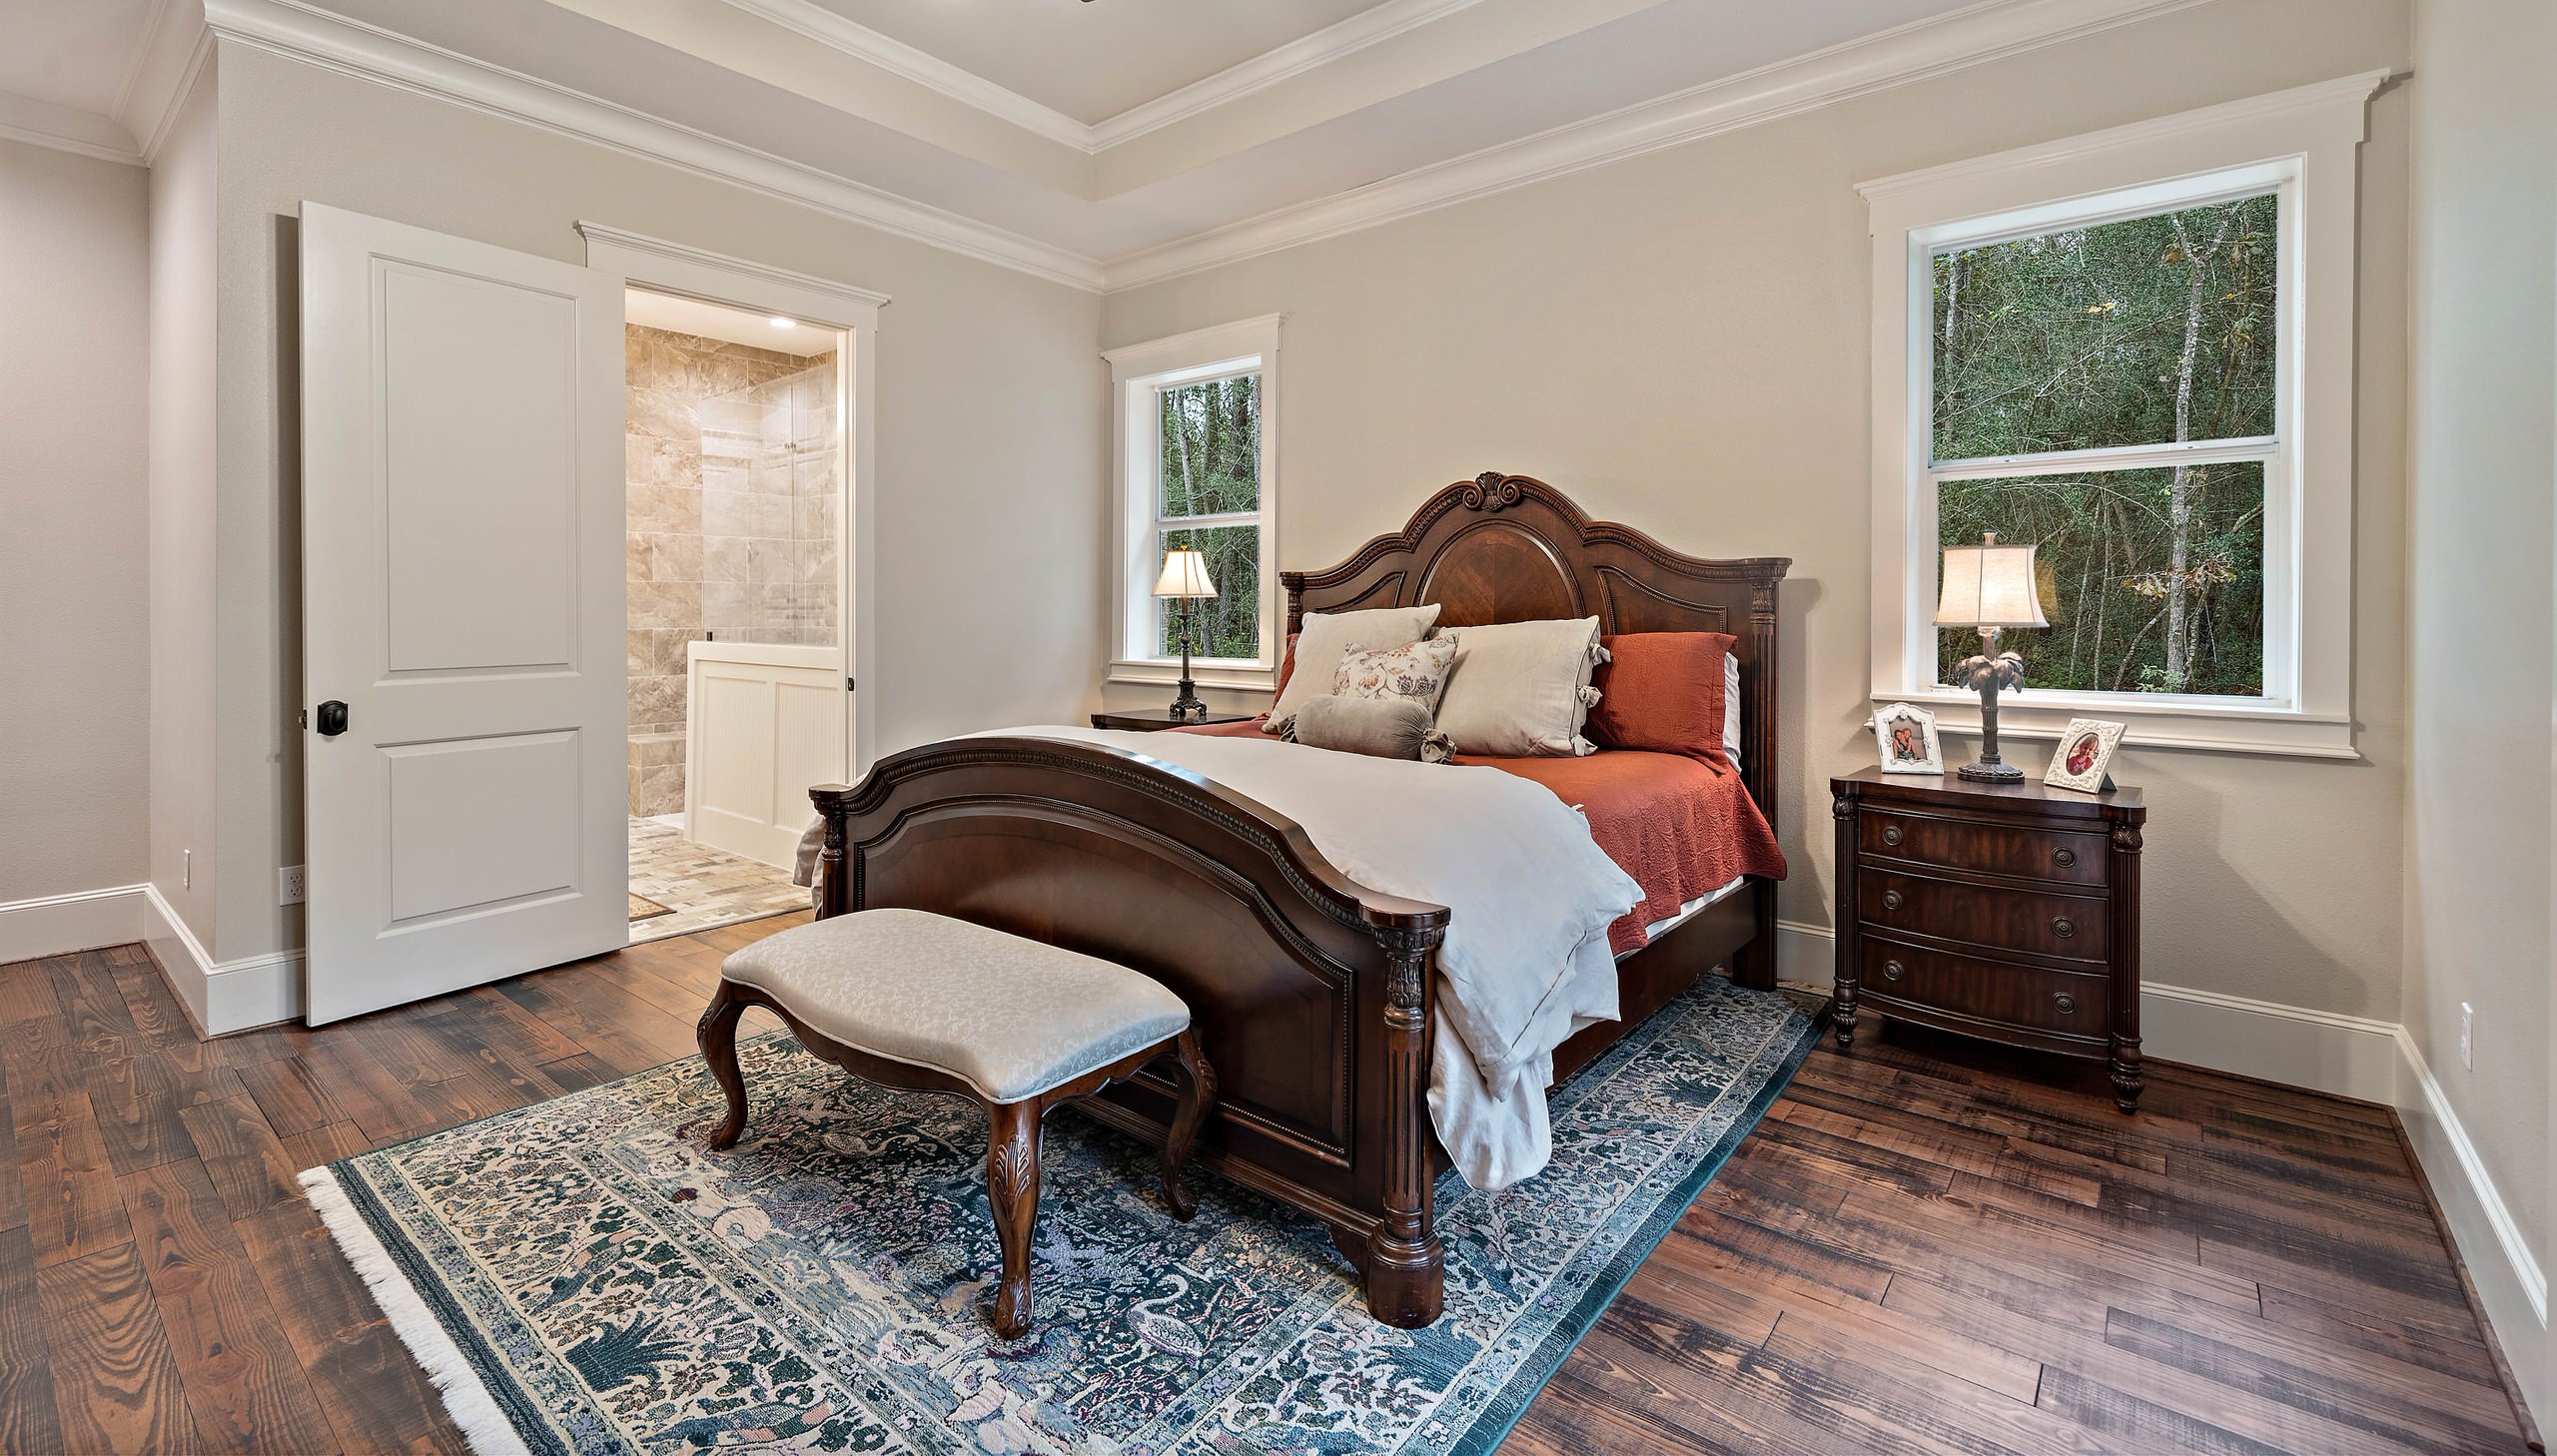 75 beautiful bedroom pictures & ideas - july, 2020 | houzz